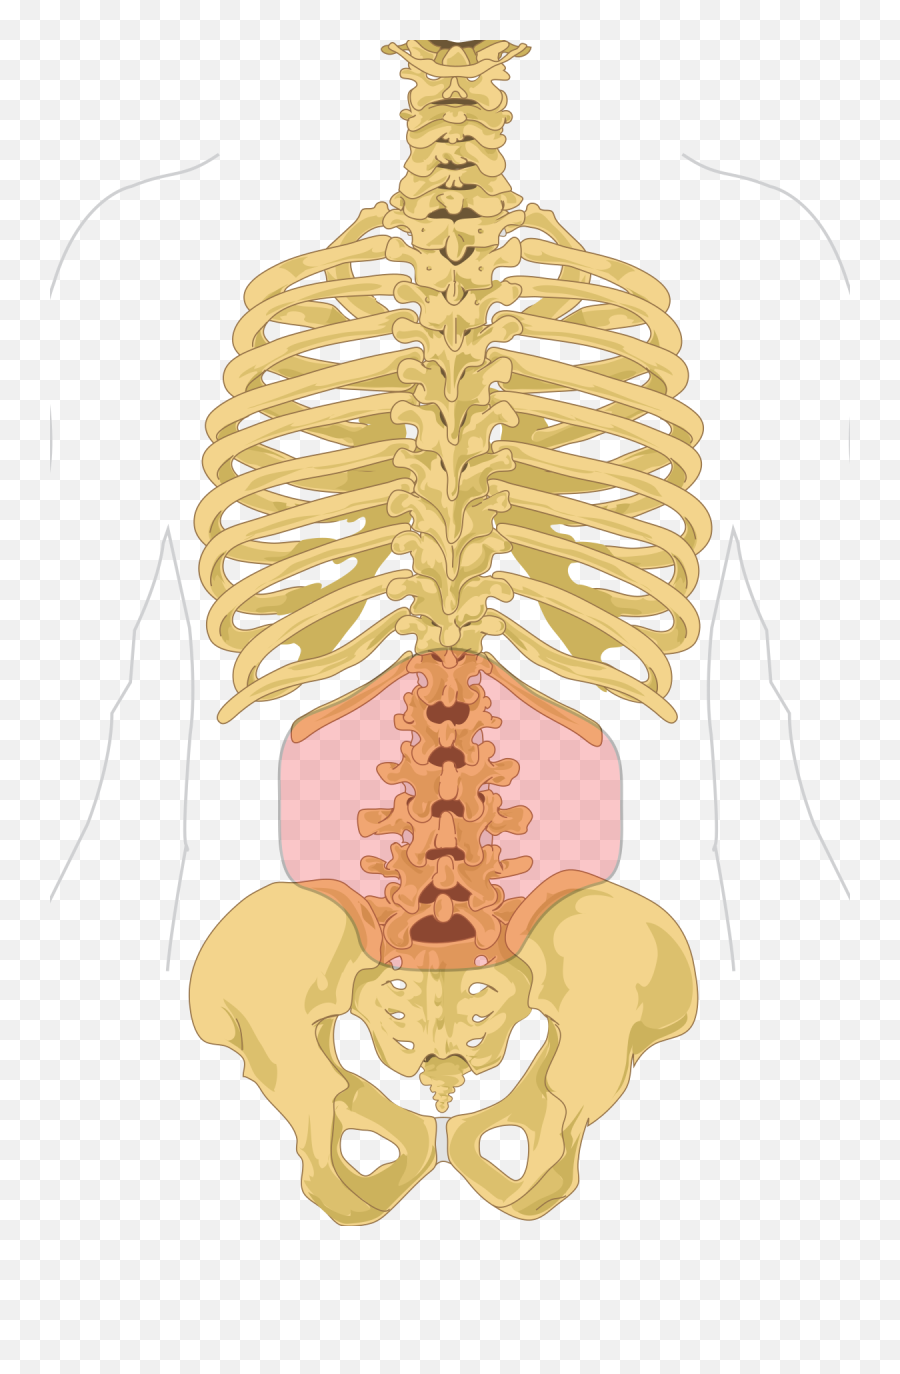 Low Back Pain - Lower Back Emoji,What Emotion Is Connected To Lower Back Pain